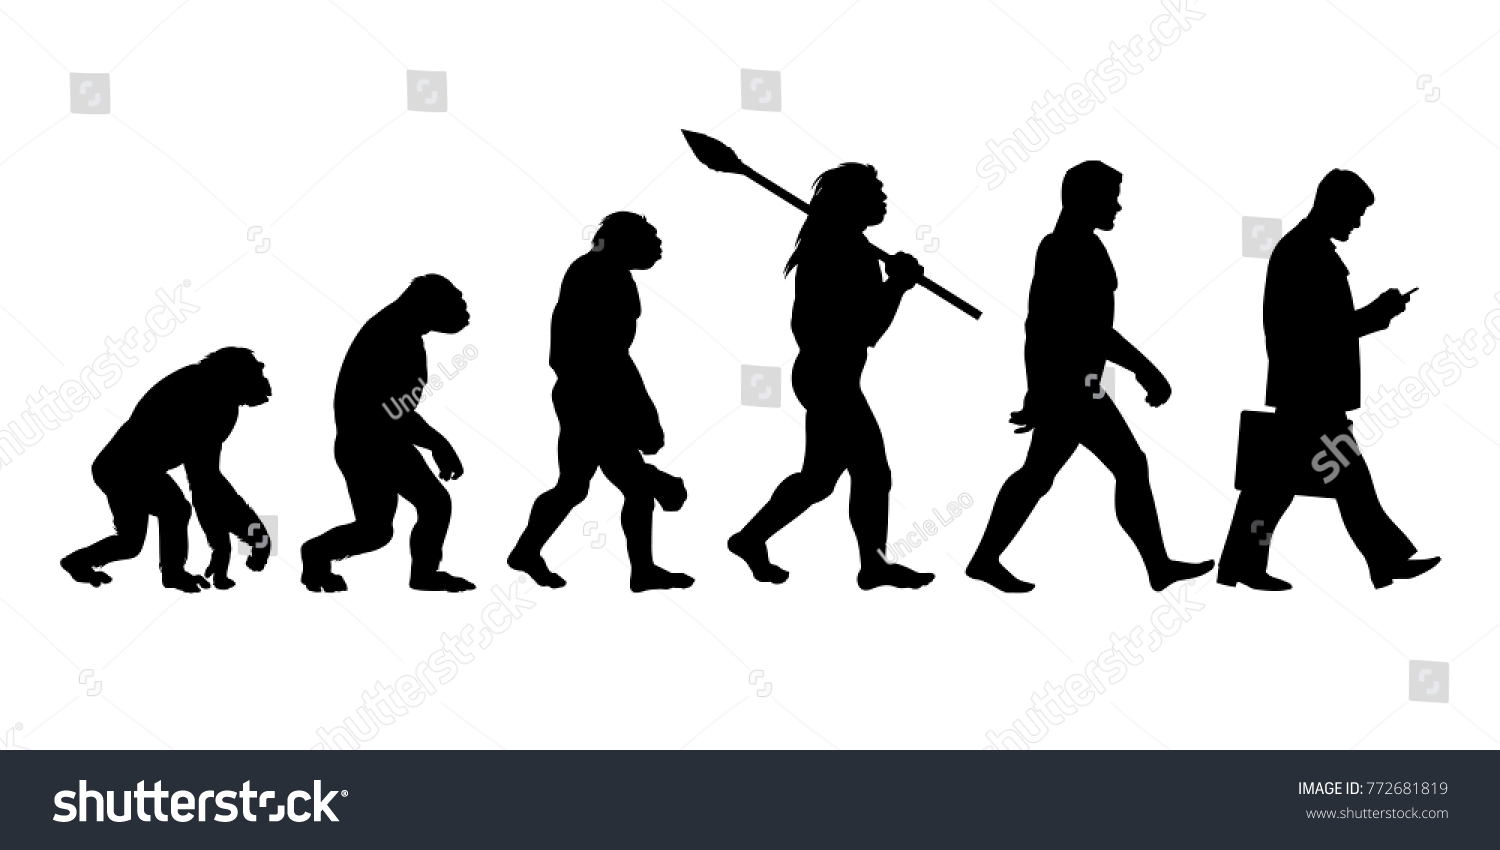 SVG of Theory of evolution of man silhouette. Human development from monkey to modern businessmen with  briefcase talking on mobile phone. Hand drawn sketch vector illustration isolated on white background. svg